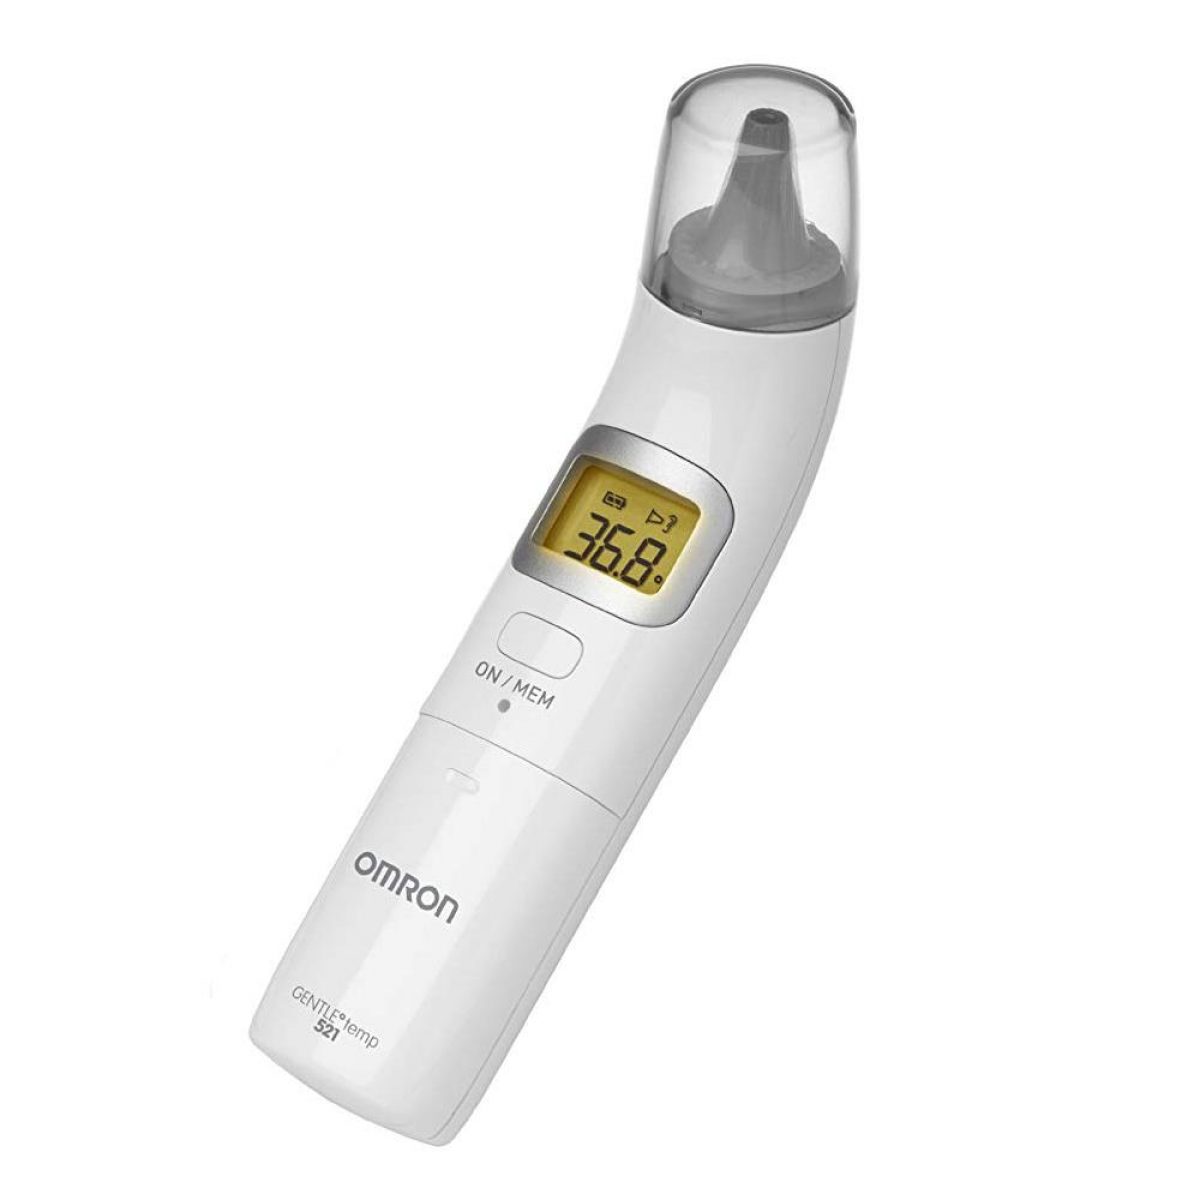 OMRON Gentle Temp 521 Clinicare